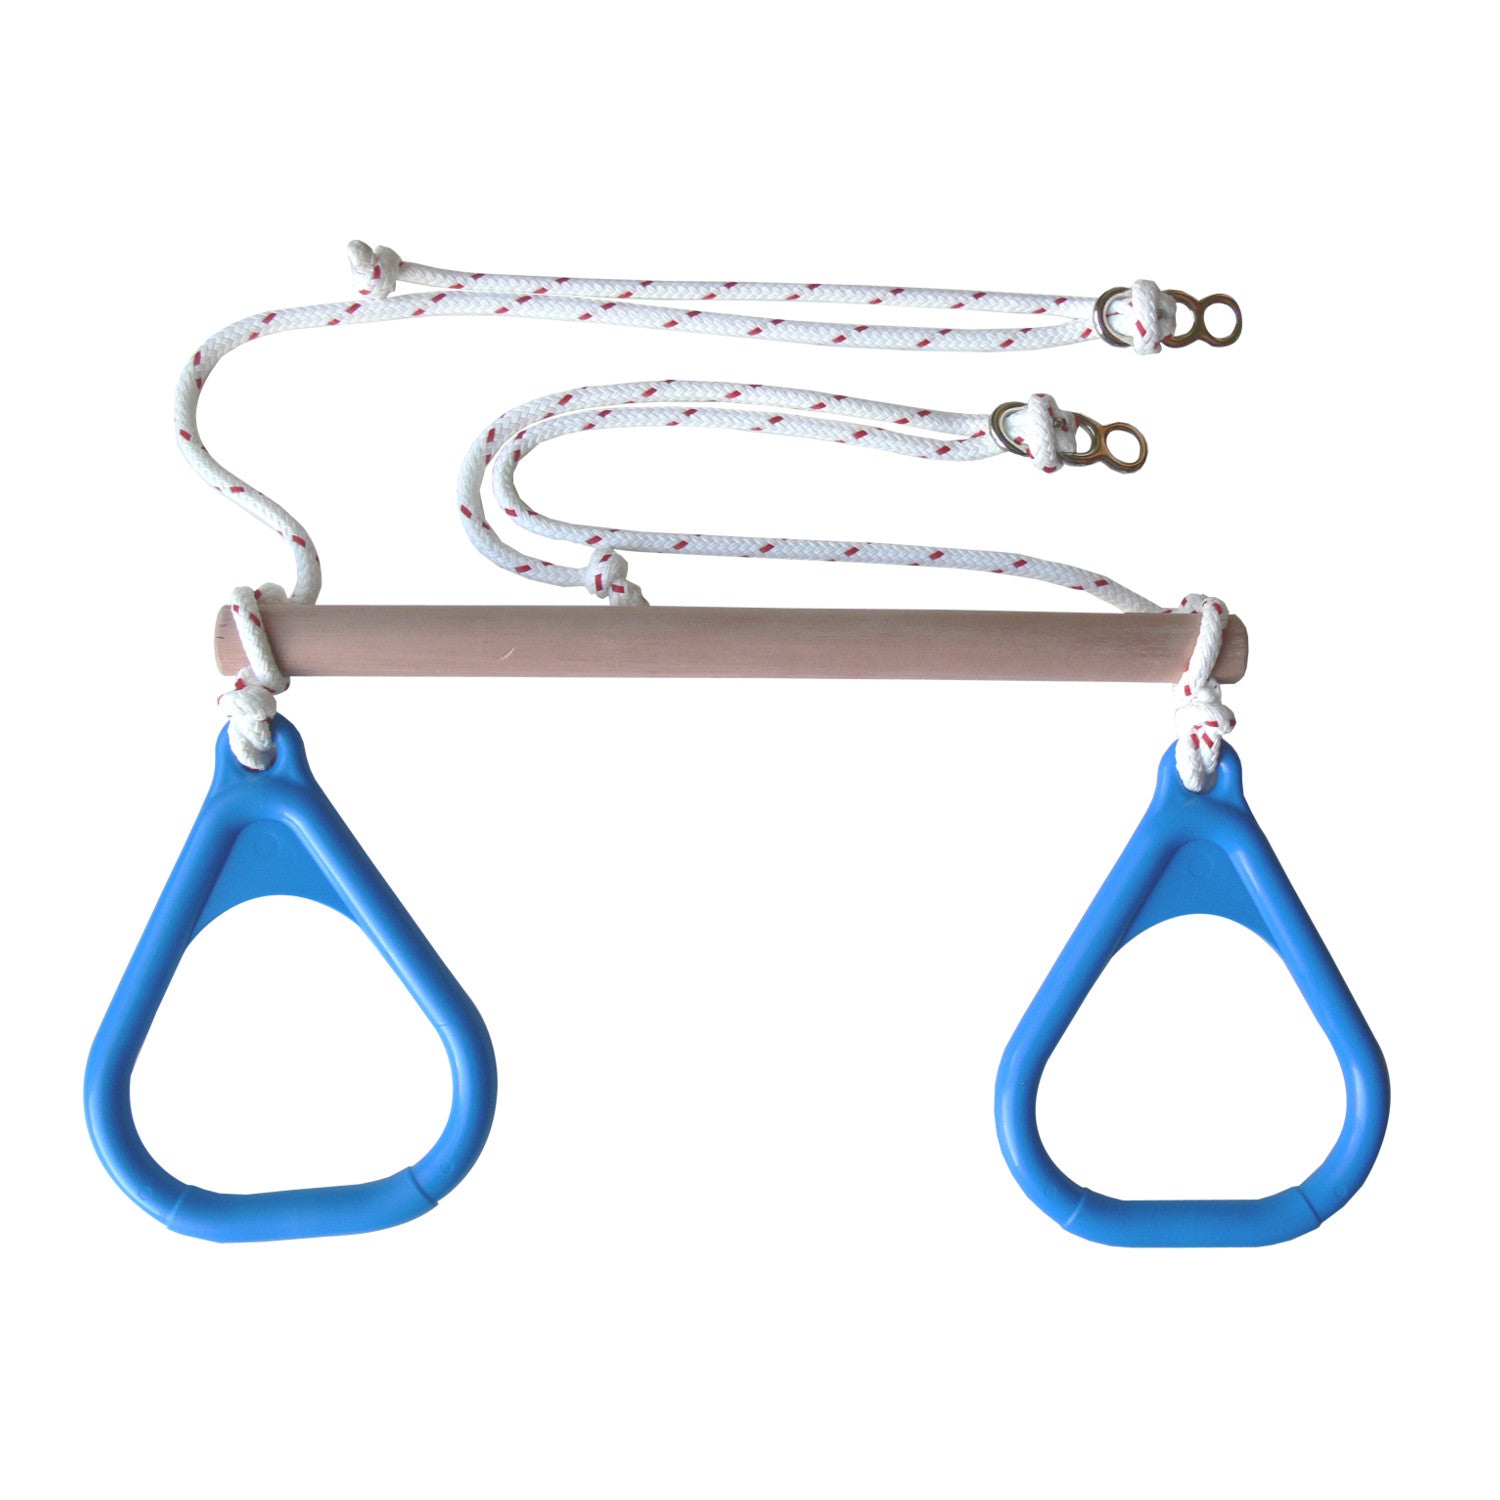 Gym Rings and Trapeze Bar Combo - Blue - DreamGYM